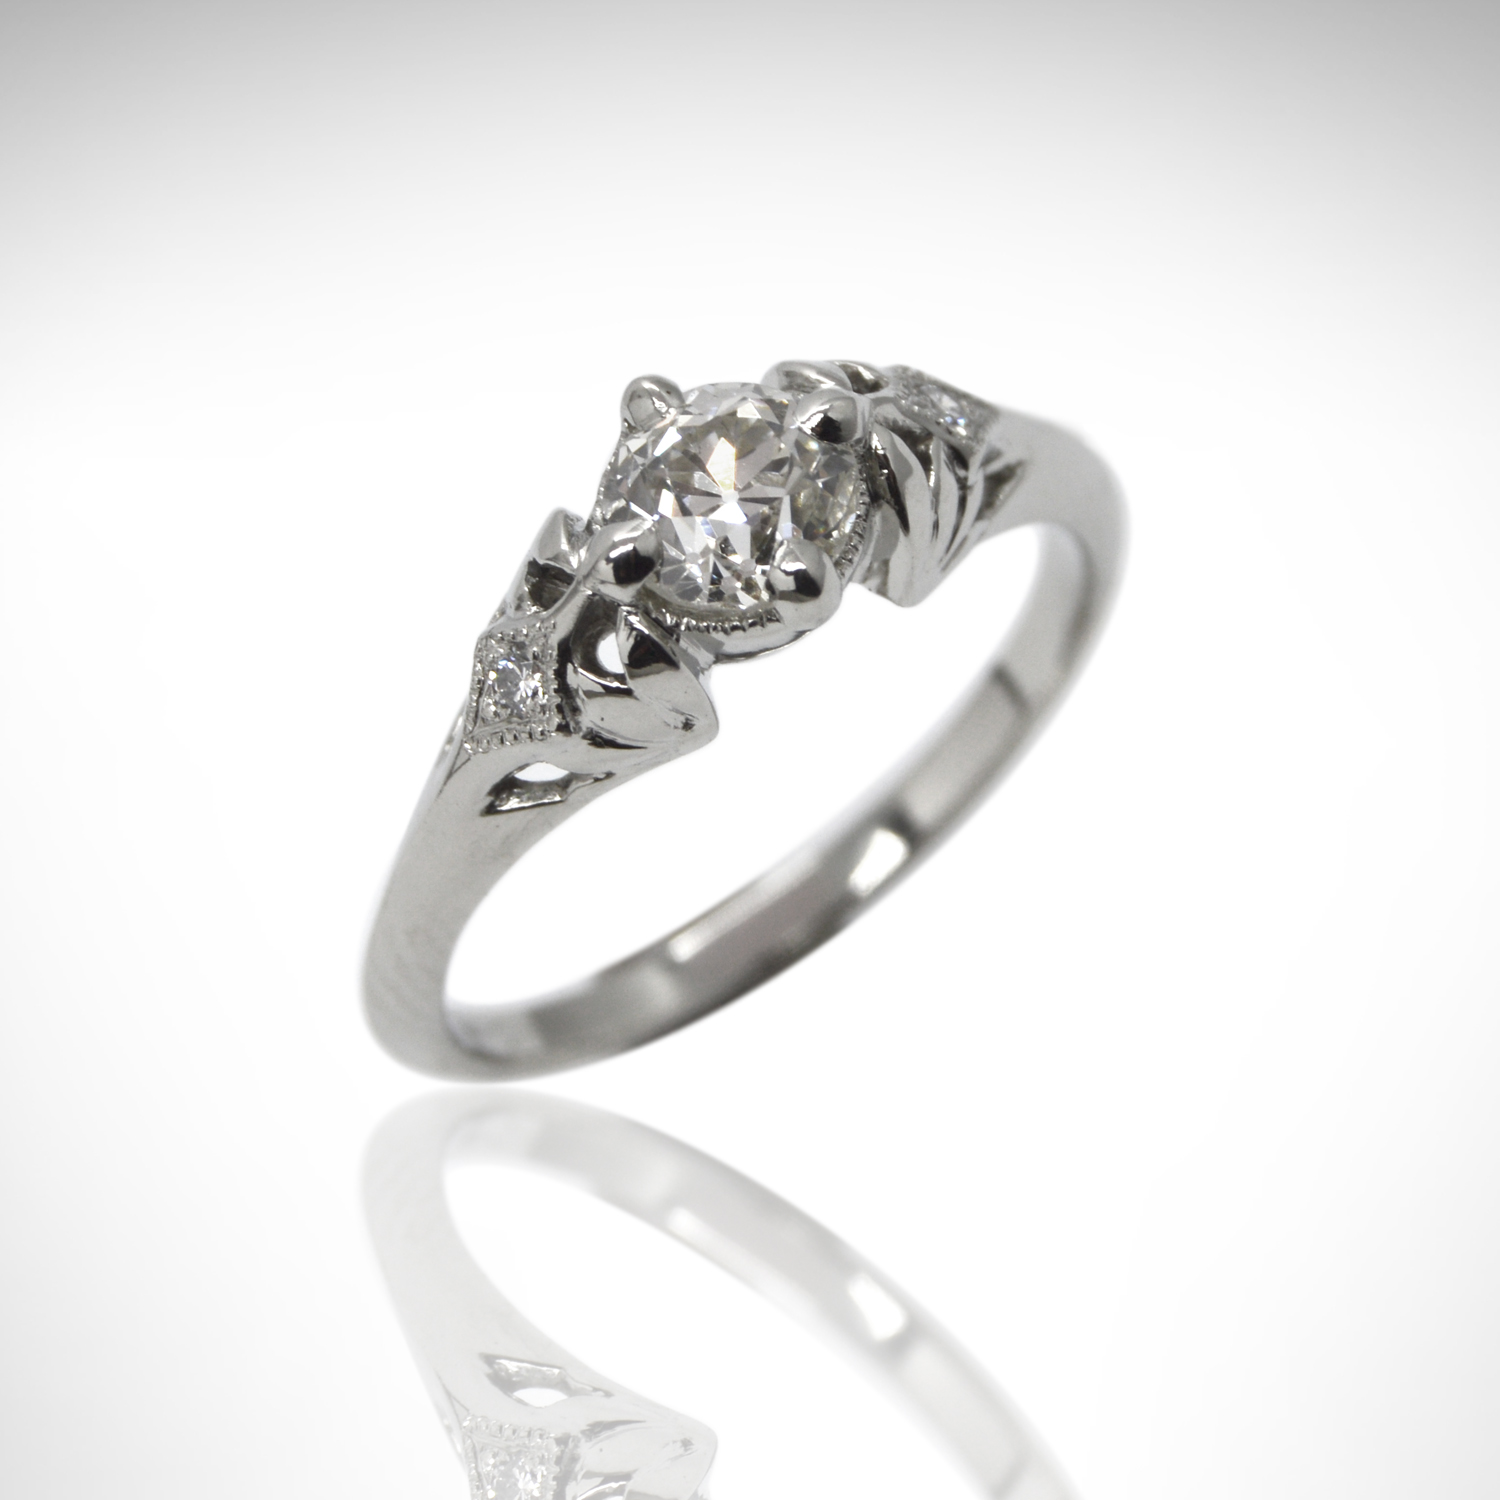 one of a kind engagement ring with old european cut diamond in 14k white gold with edwardian vintage inspired filigree setting and accent diamonds with millgrain detail